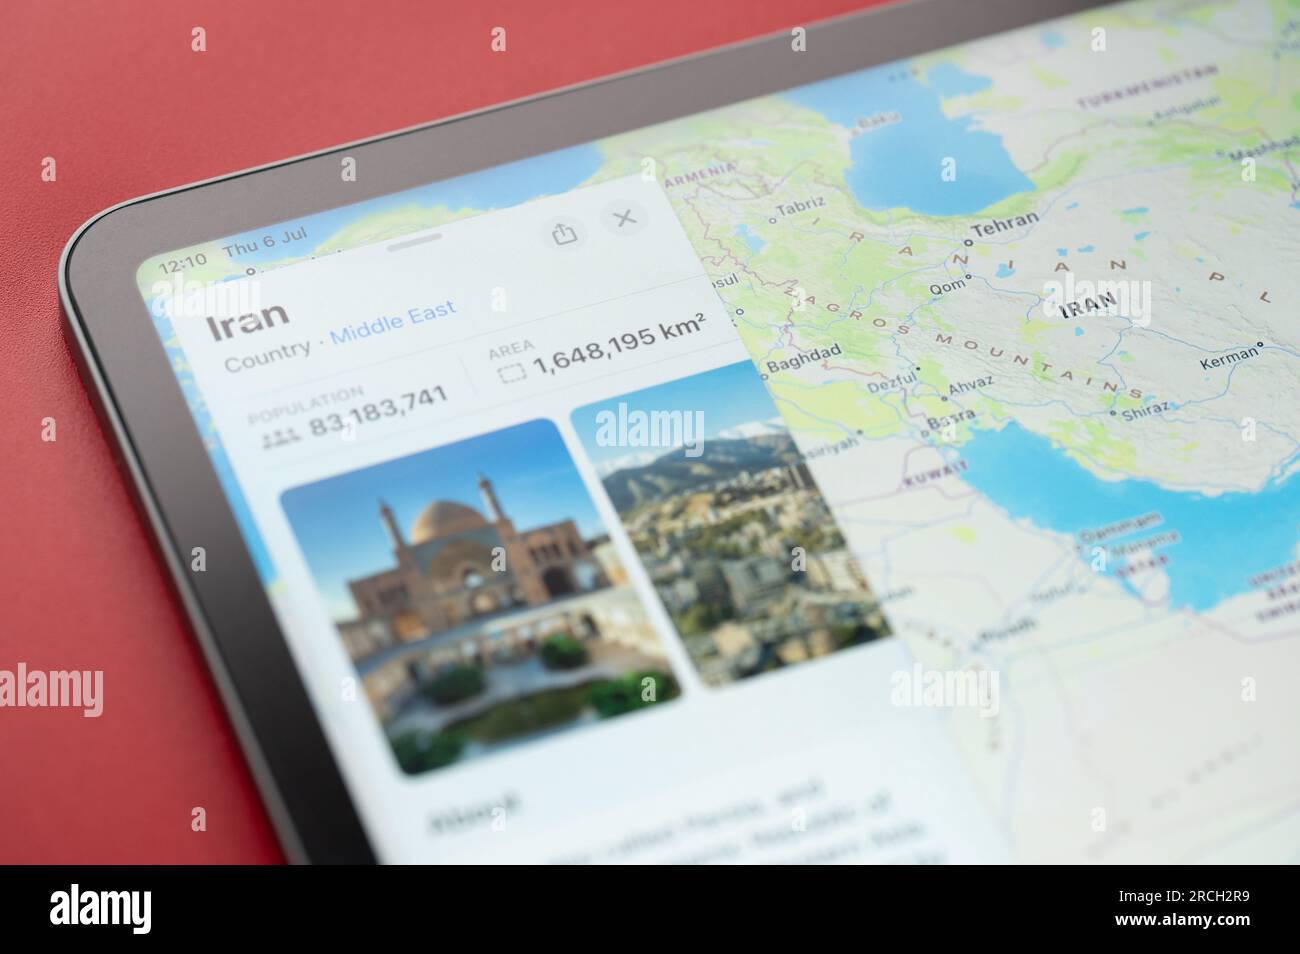 New York, USA - July 6, 2023: About Iran country in digital map ipad macro close up view Stock Photo